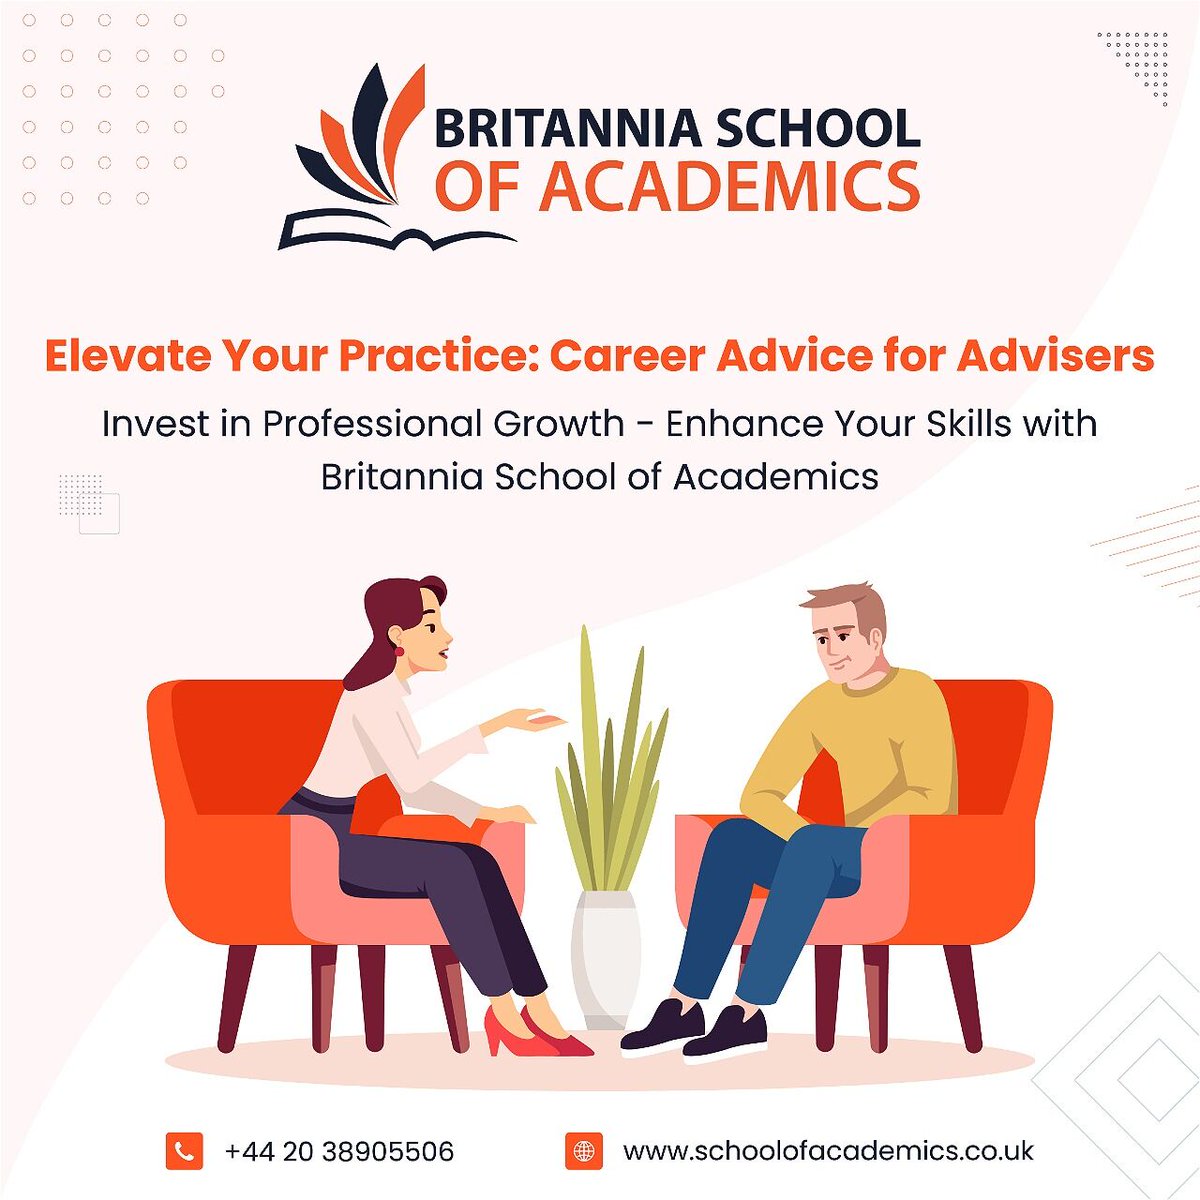 For effective support, #Advisers must prioritise #ProfessionalGrowth:
Be Curious, Attend #Workshops, Seek #Mentorship & Reflect.

#BritanniaSchoolofAcademics, commitment to growth ensures superior advising.📈

 #FurtherEducation #FE #HE #IAG #Functionalskills #Apprenticeships